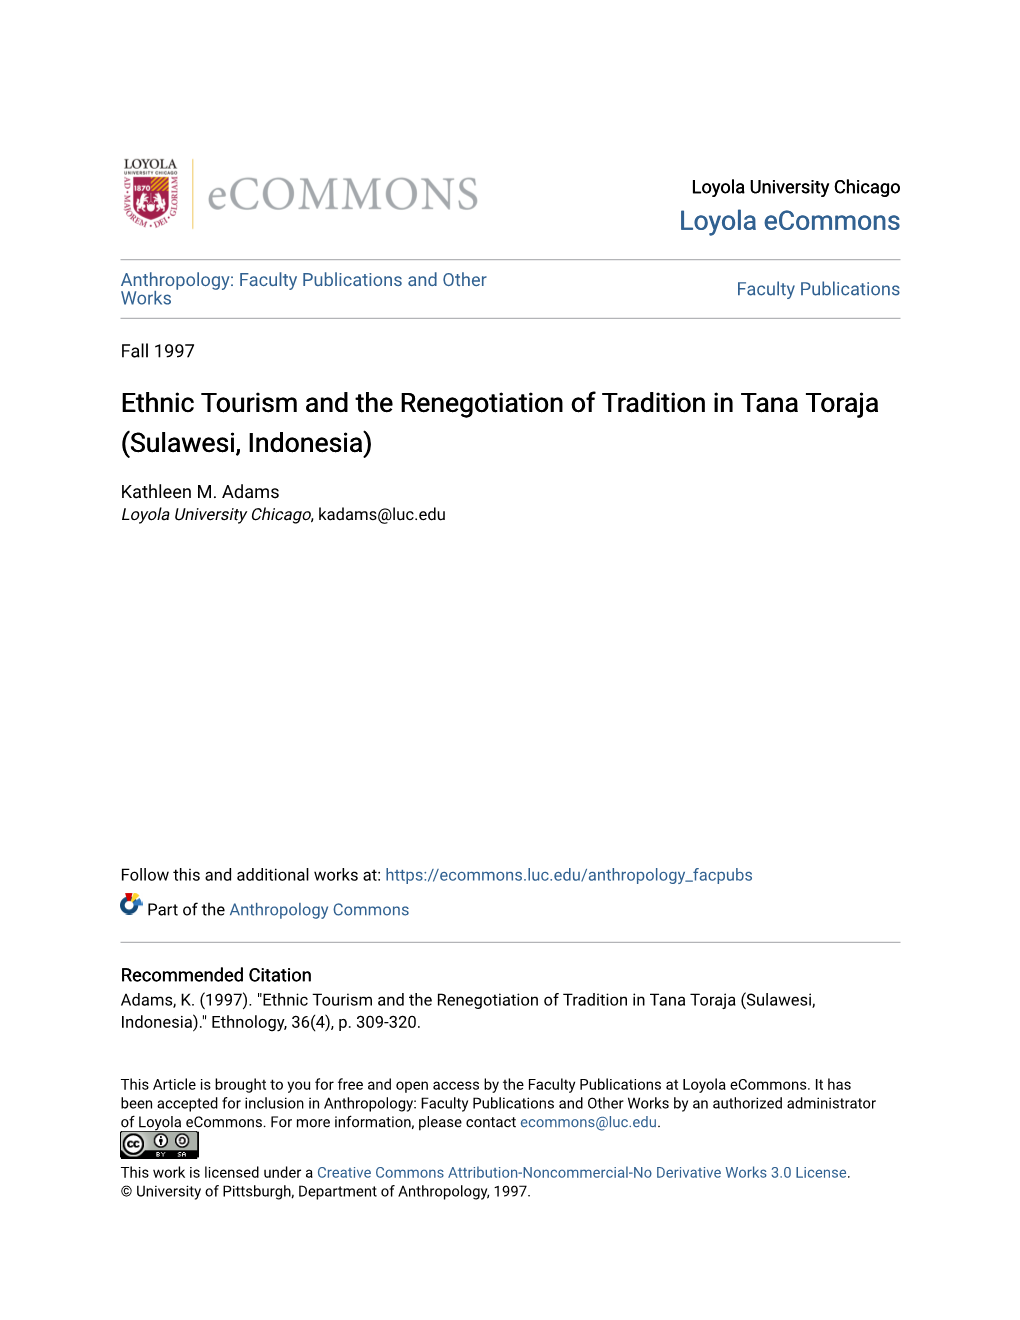 Ethnic Tourism and the Renegotiation of Tradition in Tana Toraja (Sulawesi, Indonesia)